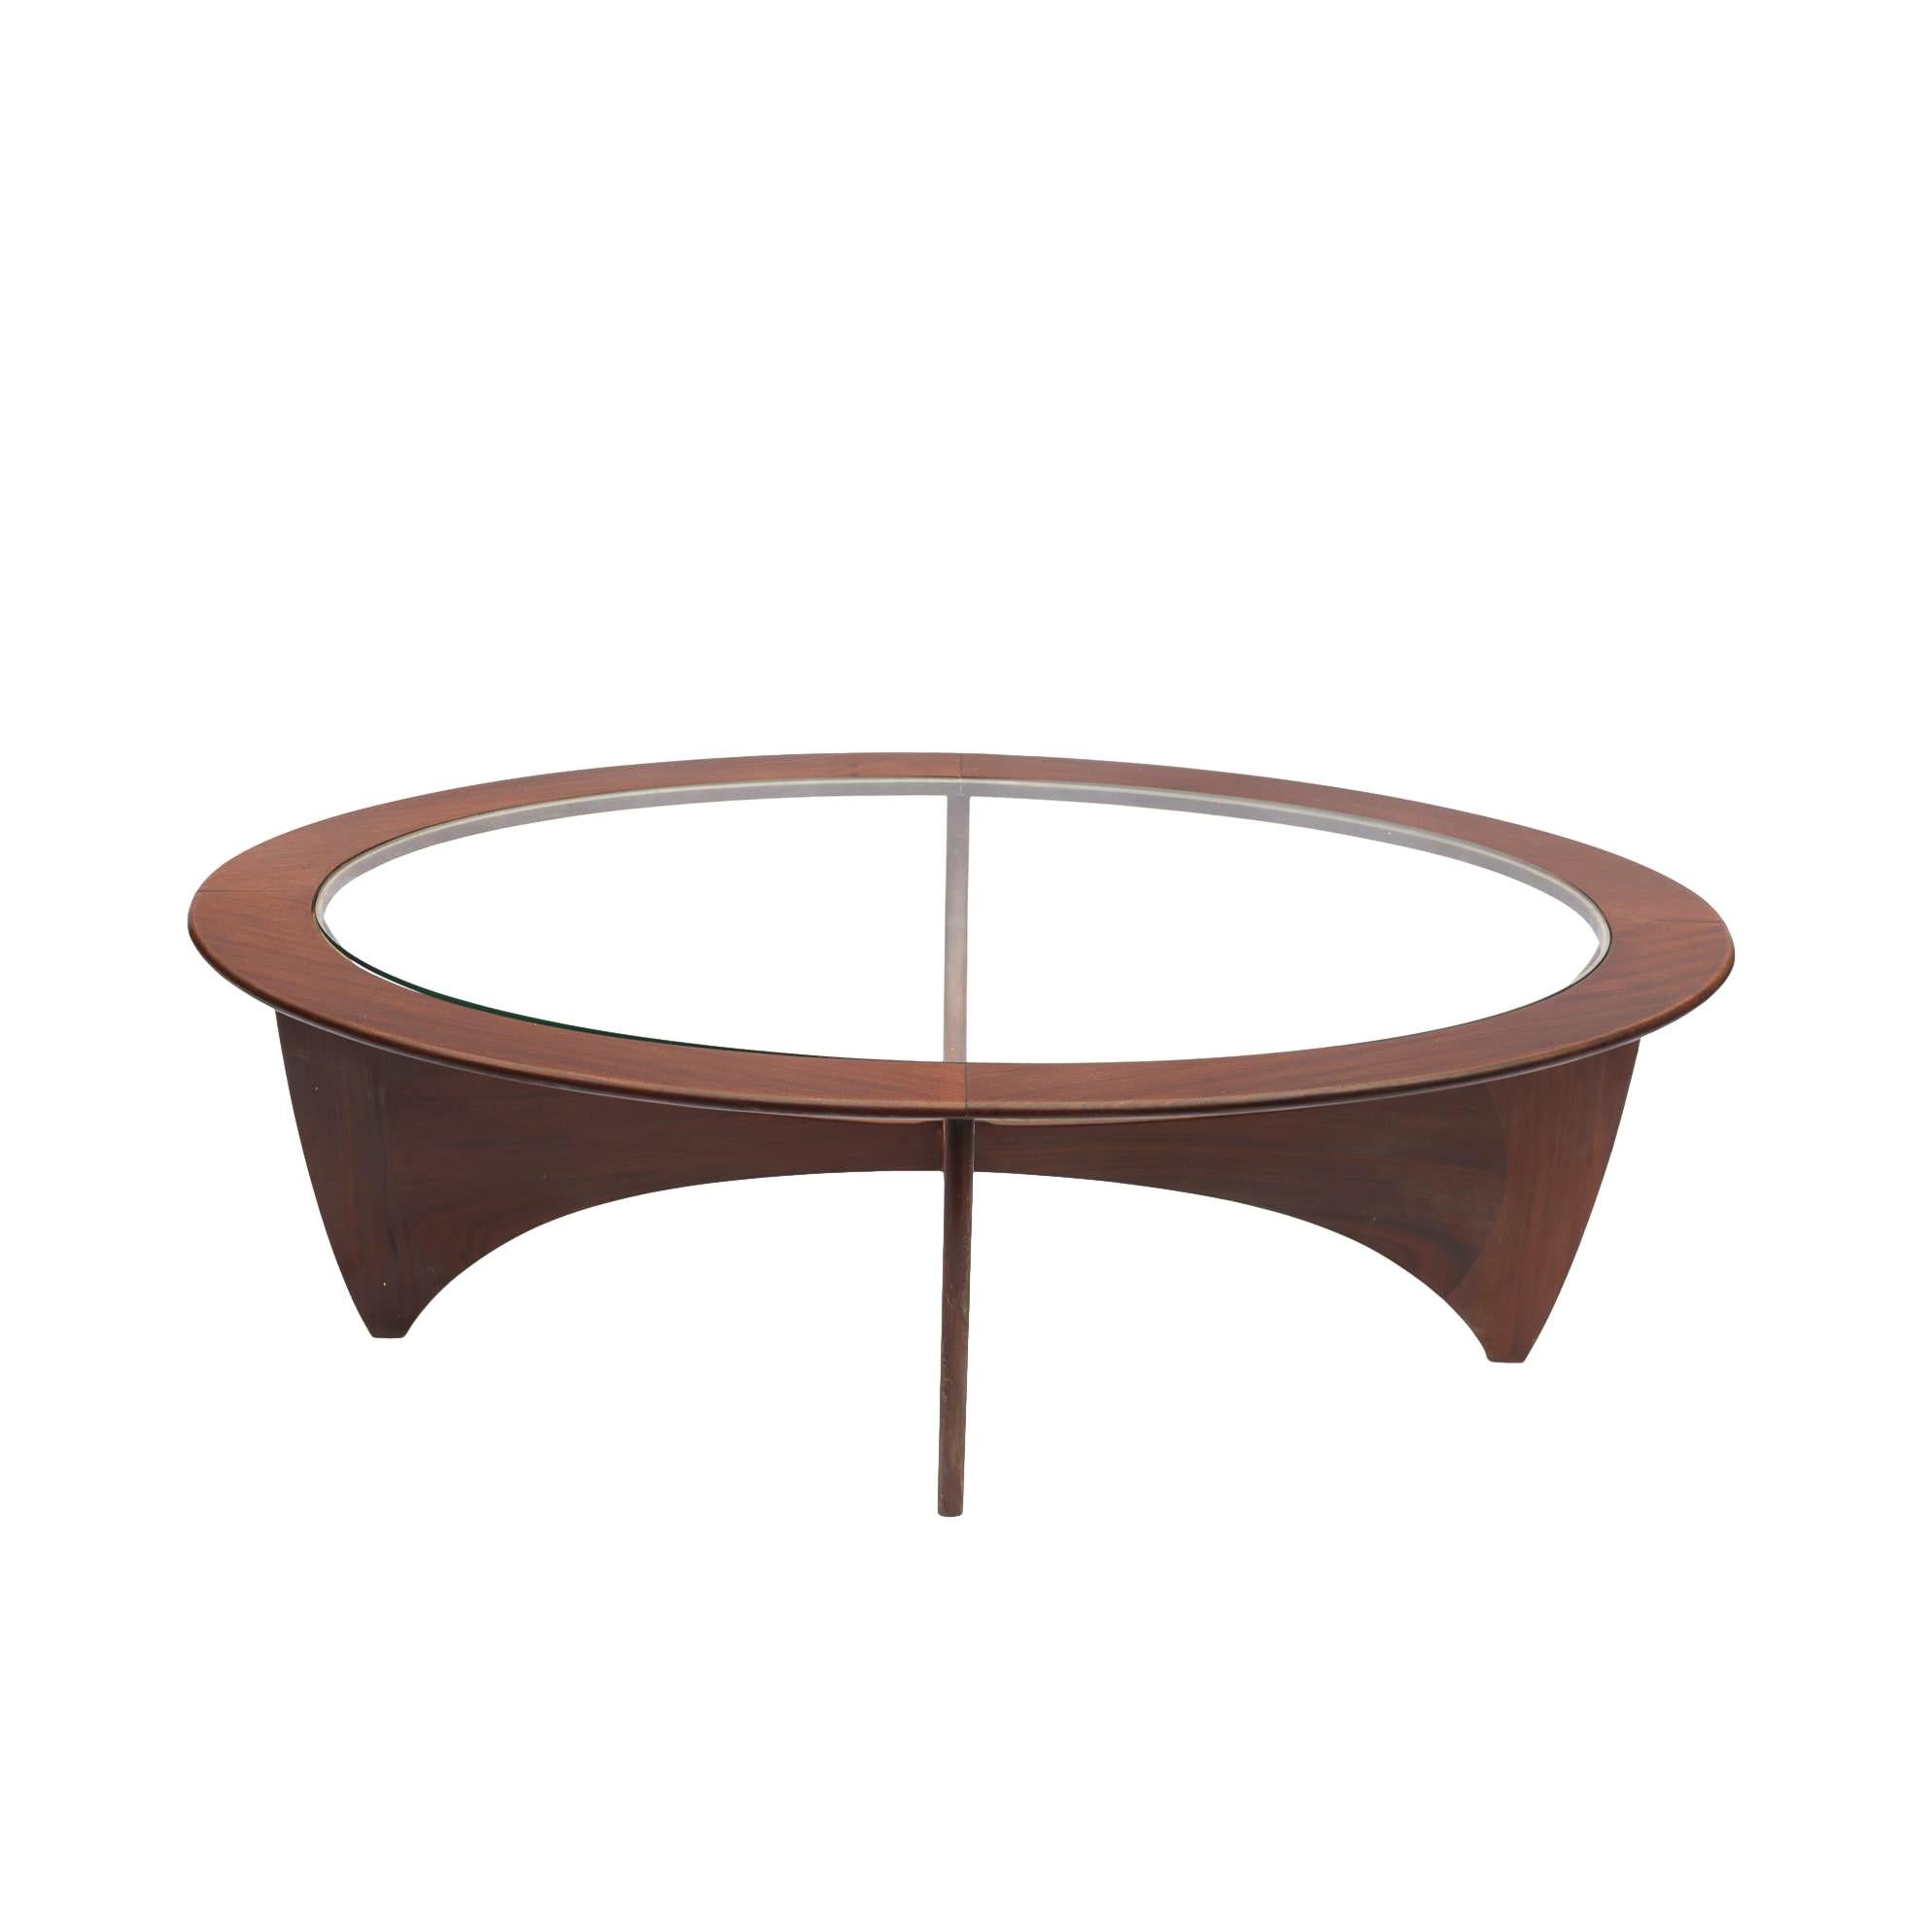 G Plan 'Astro' coffee table. Measure: W-48 ins.
This iconic table, designed by Victor Wilkins for G Plan in 1960, is an emblem of the time, the world’s entry into the Space Age. 
Constructed in Afromasia teak; with glass insert. 
When the years